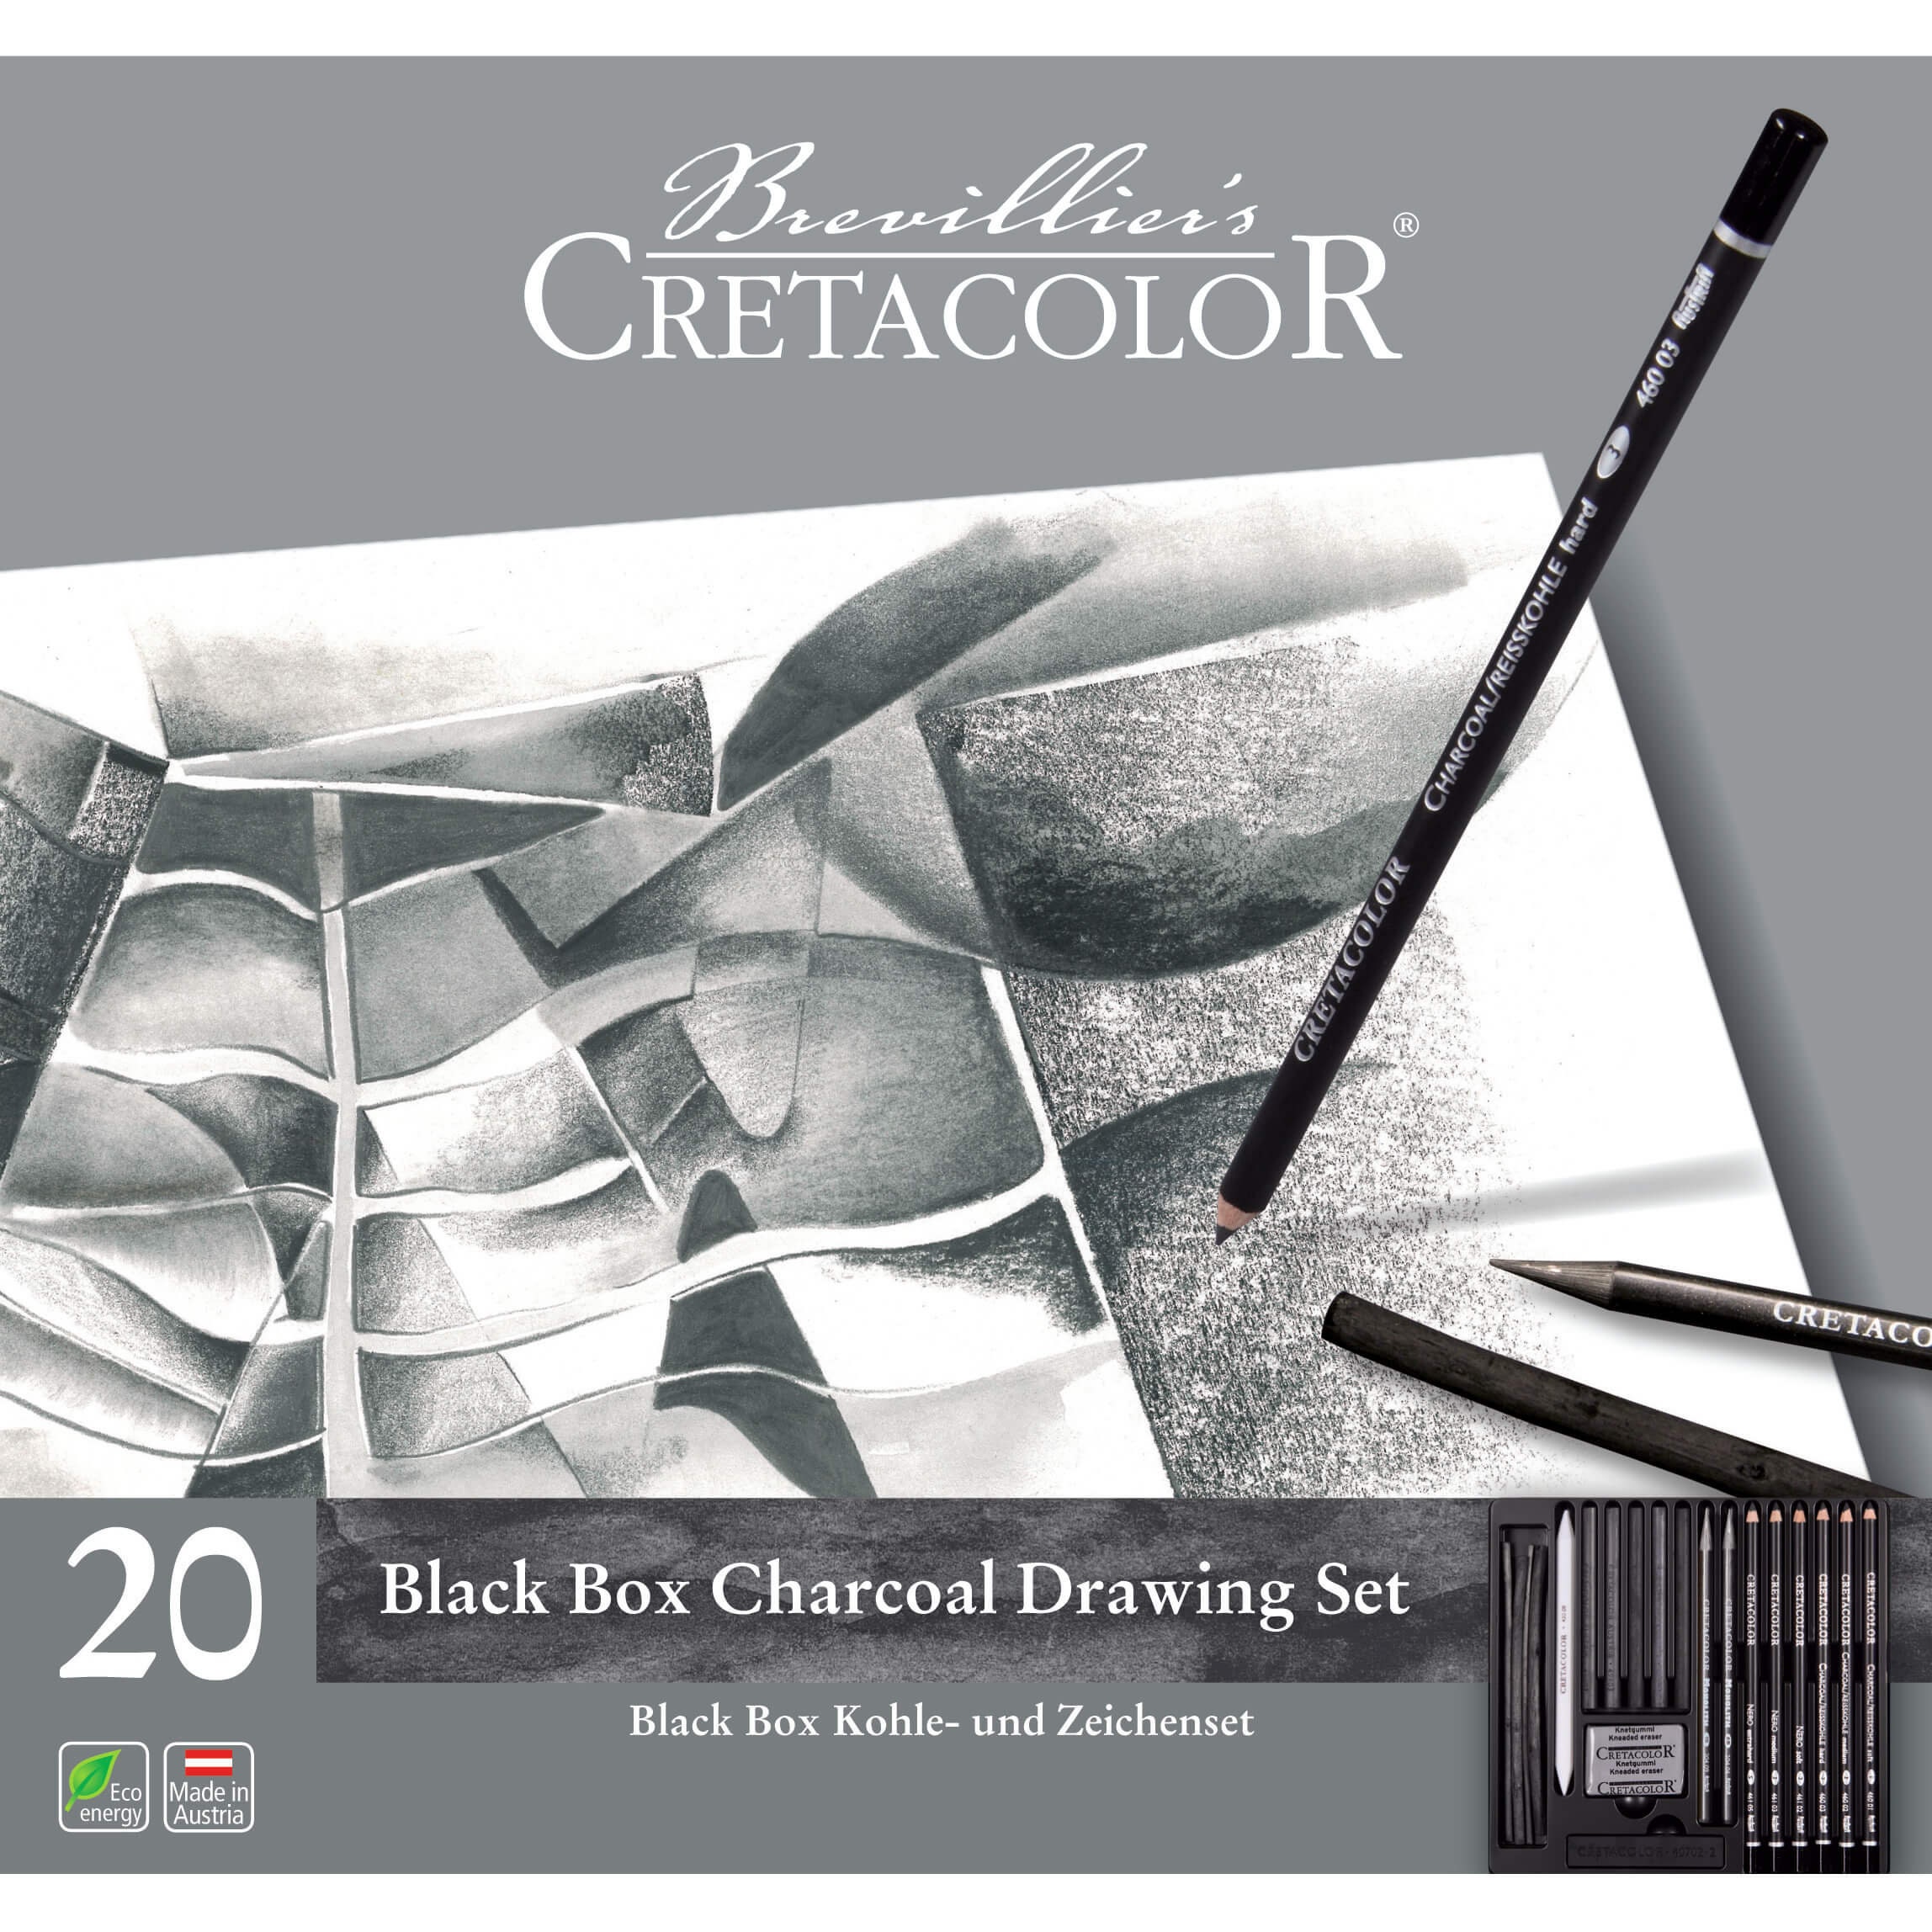 CRETACOLOR Charcoal Set 3 Count (Pack of 1)